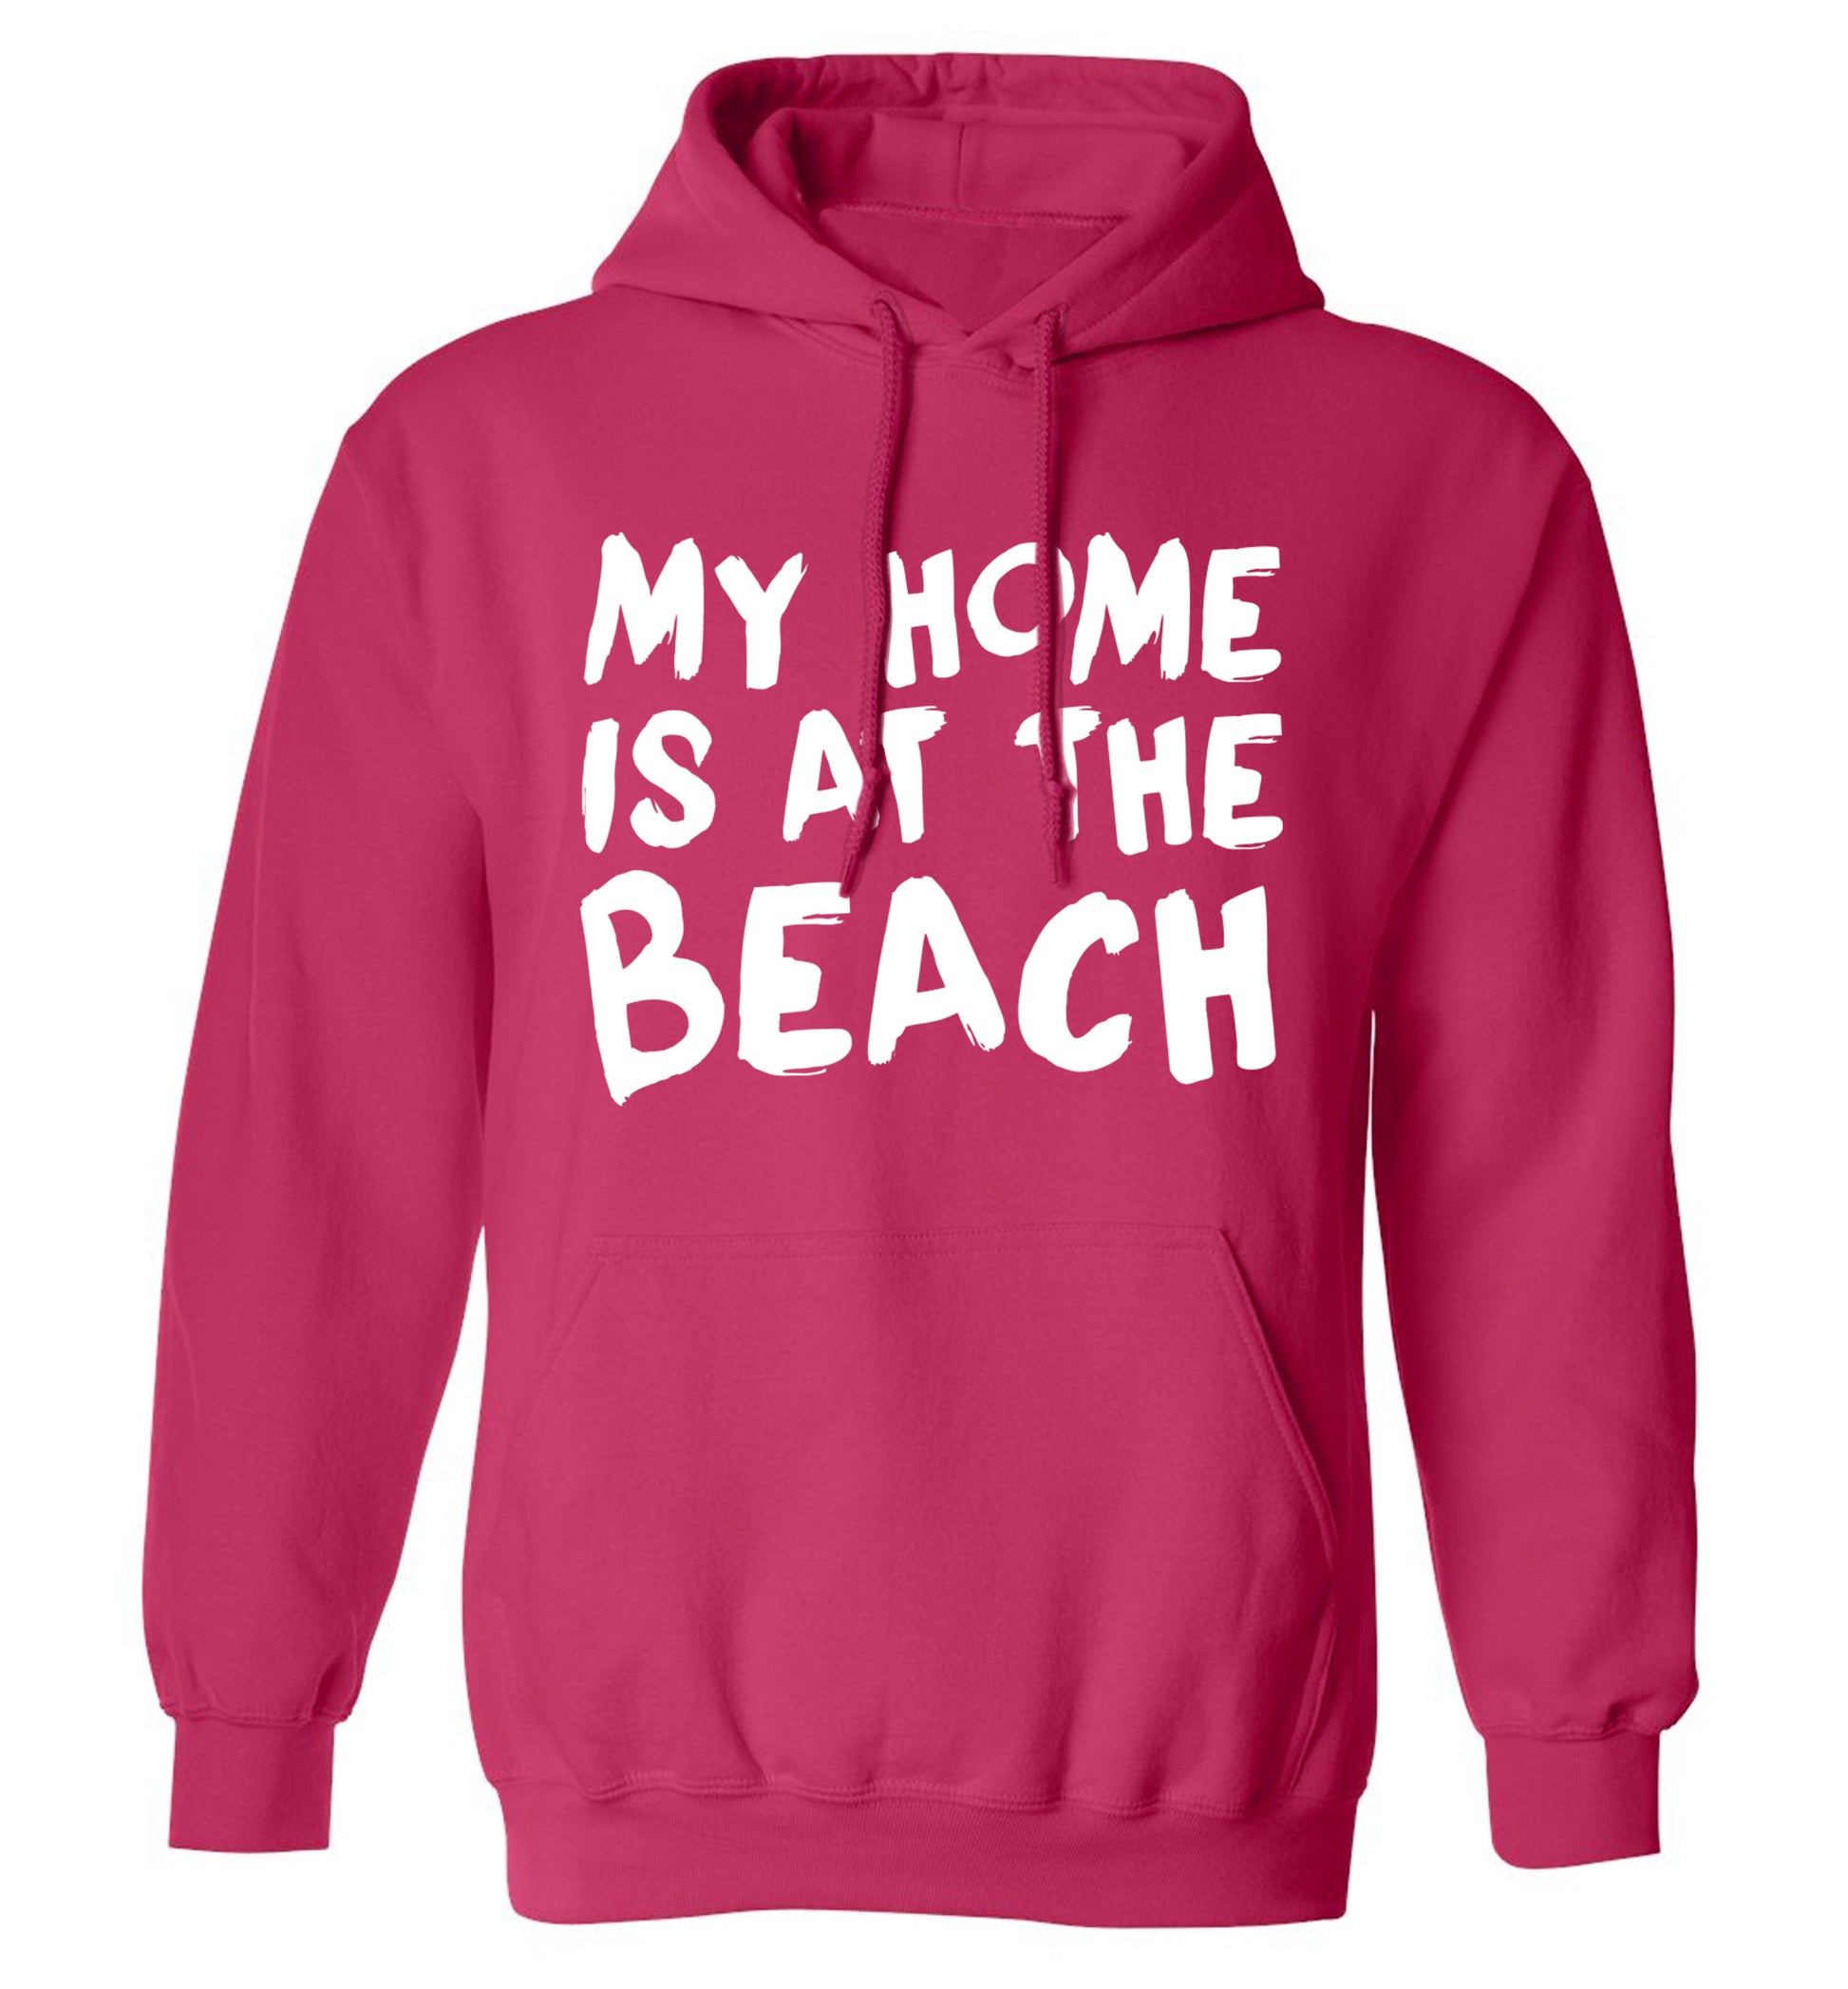 My home is at the beach adults unisex pink hoodie 2XL